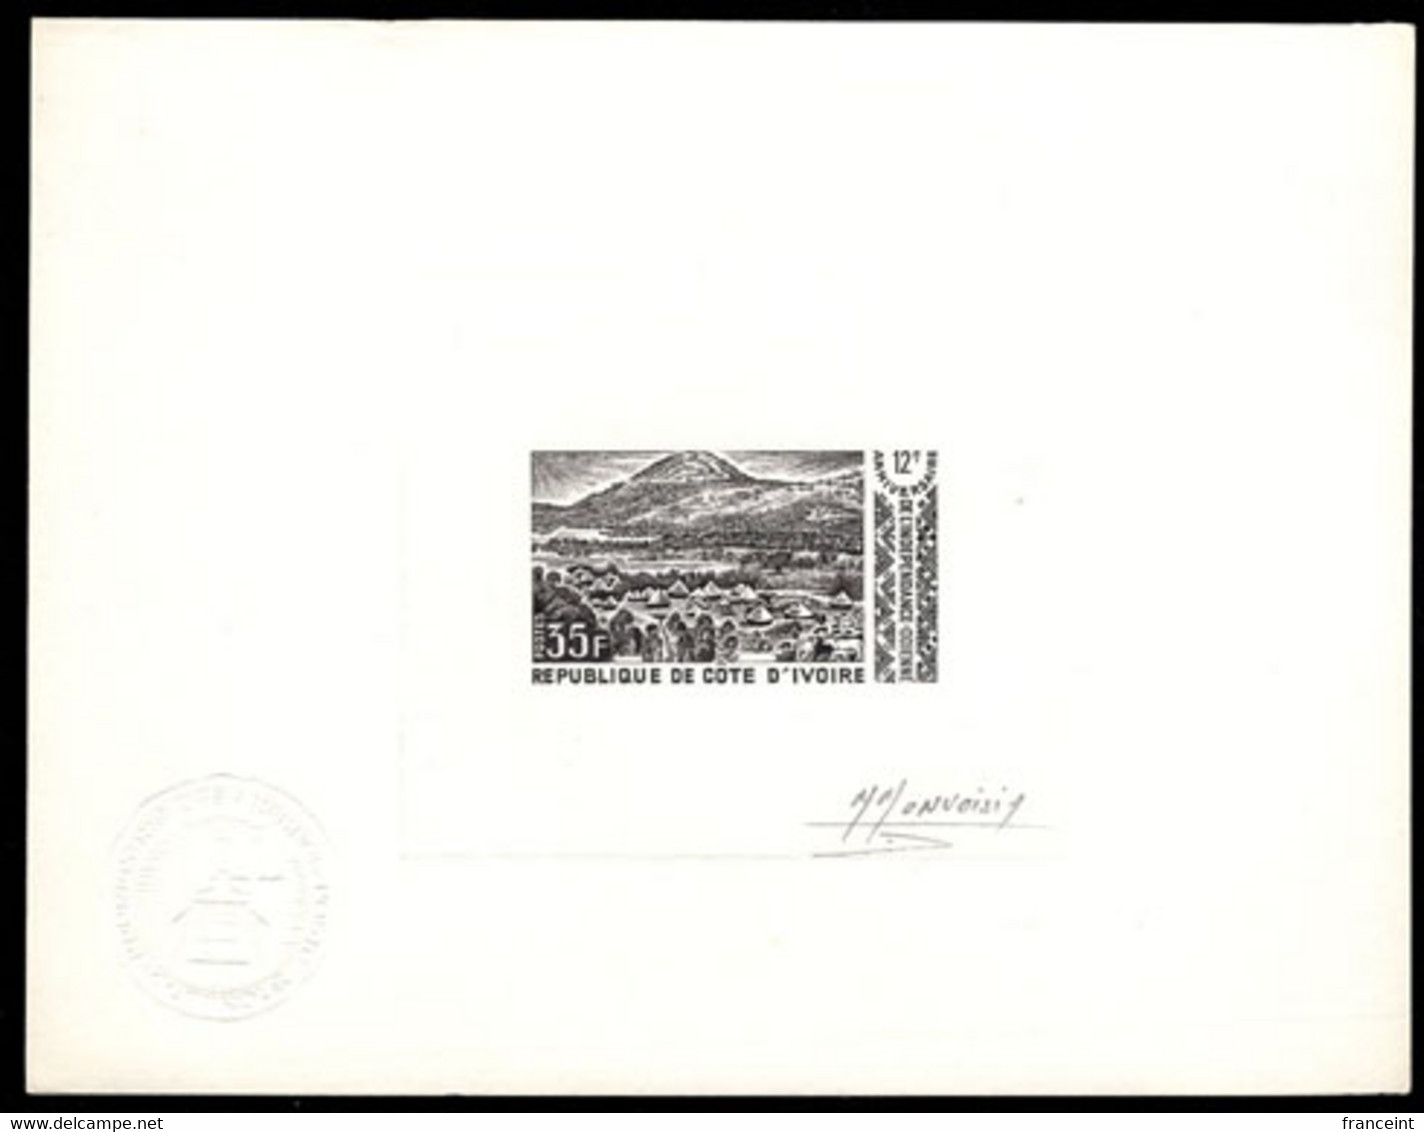 IVORY COAST(1972) View Of Odienné. Die Proof In Black Signed By The Engraver MONVOISIN. Scott No 330, Yvert No 341. - Ivory Coast (1960-...)